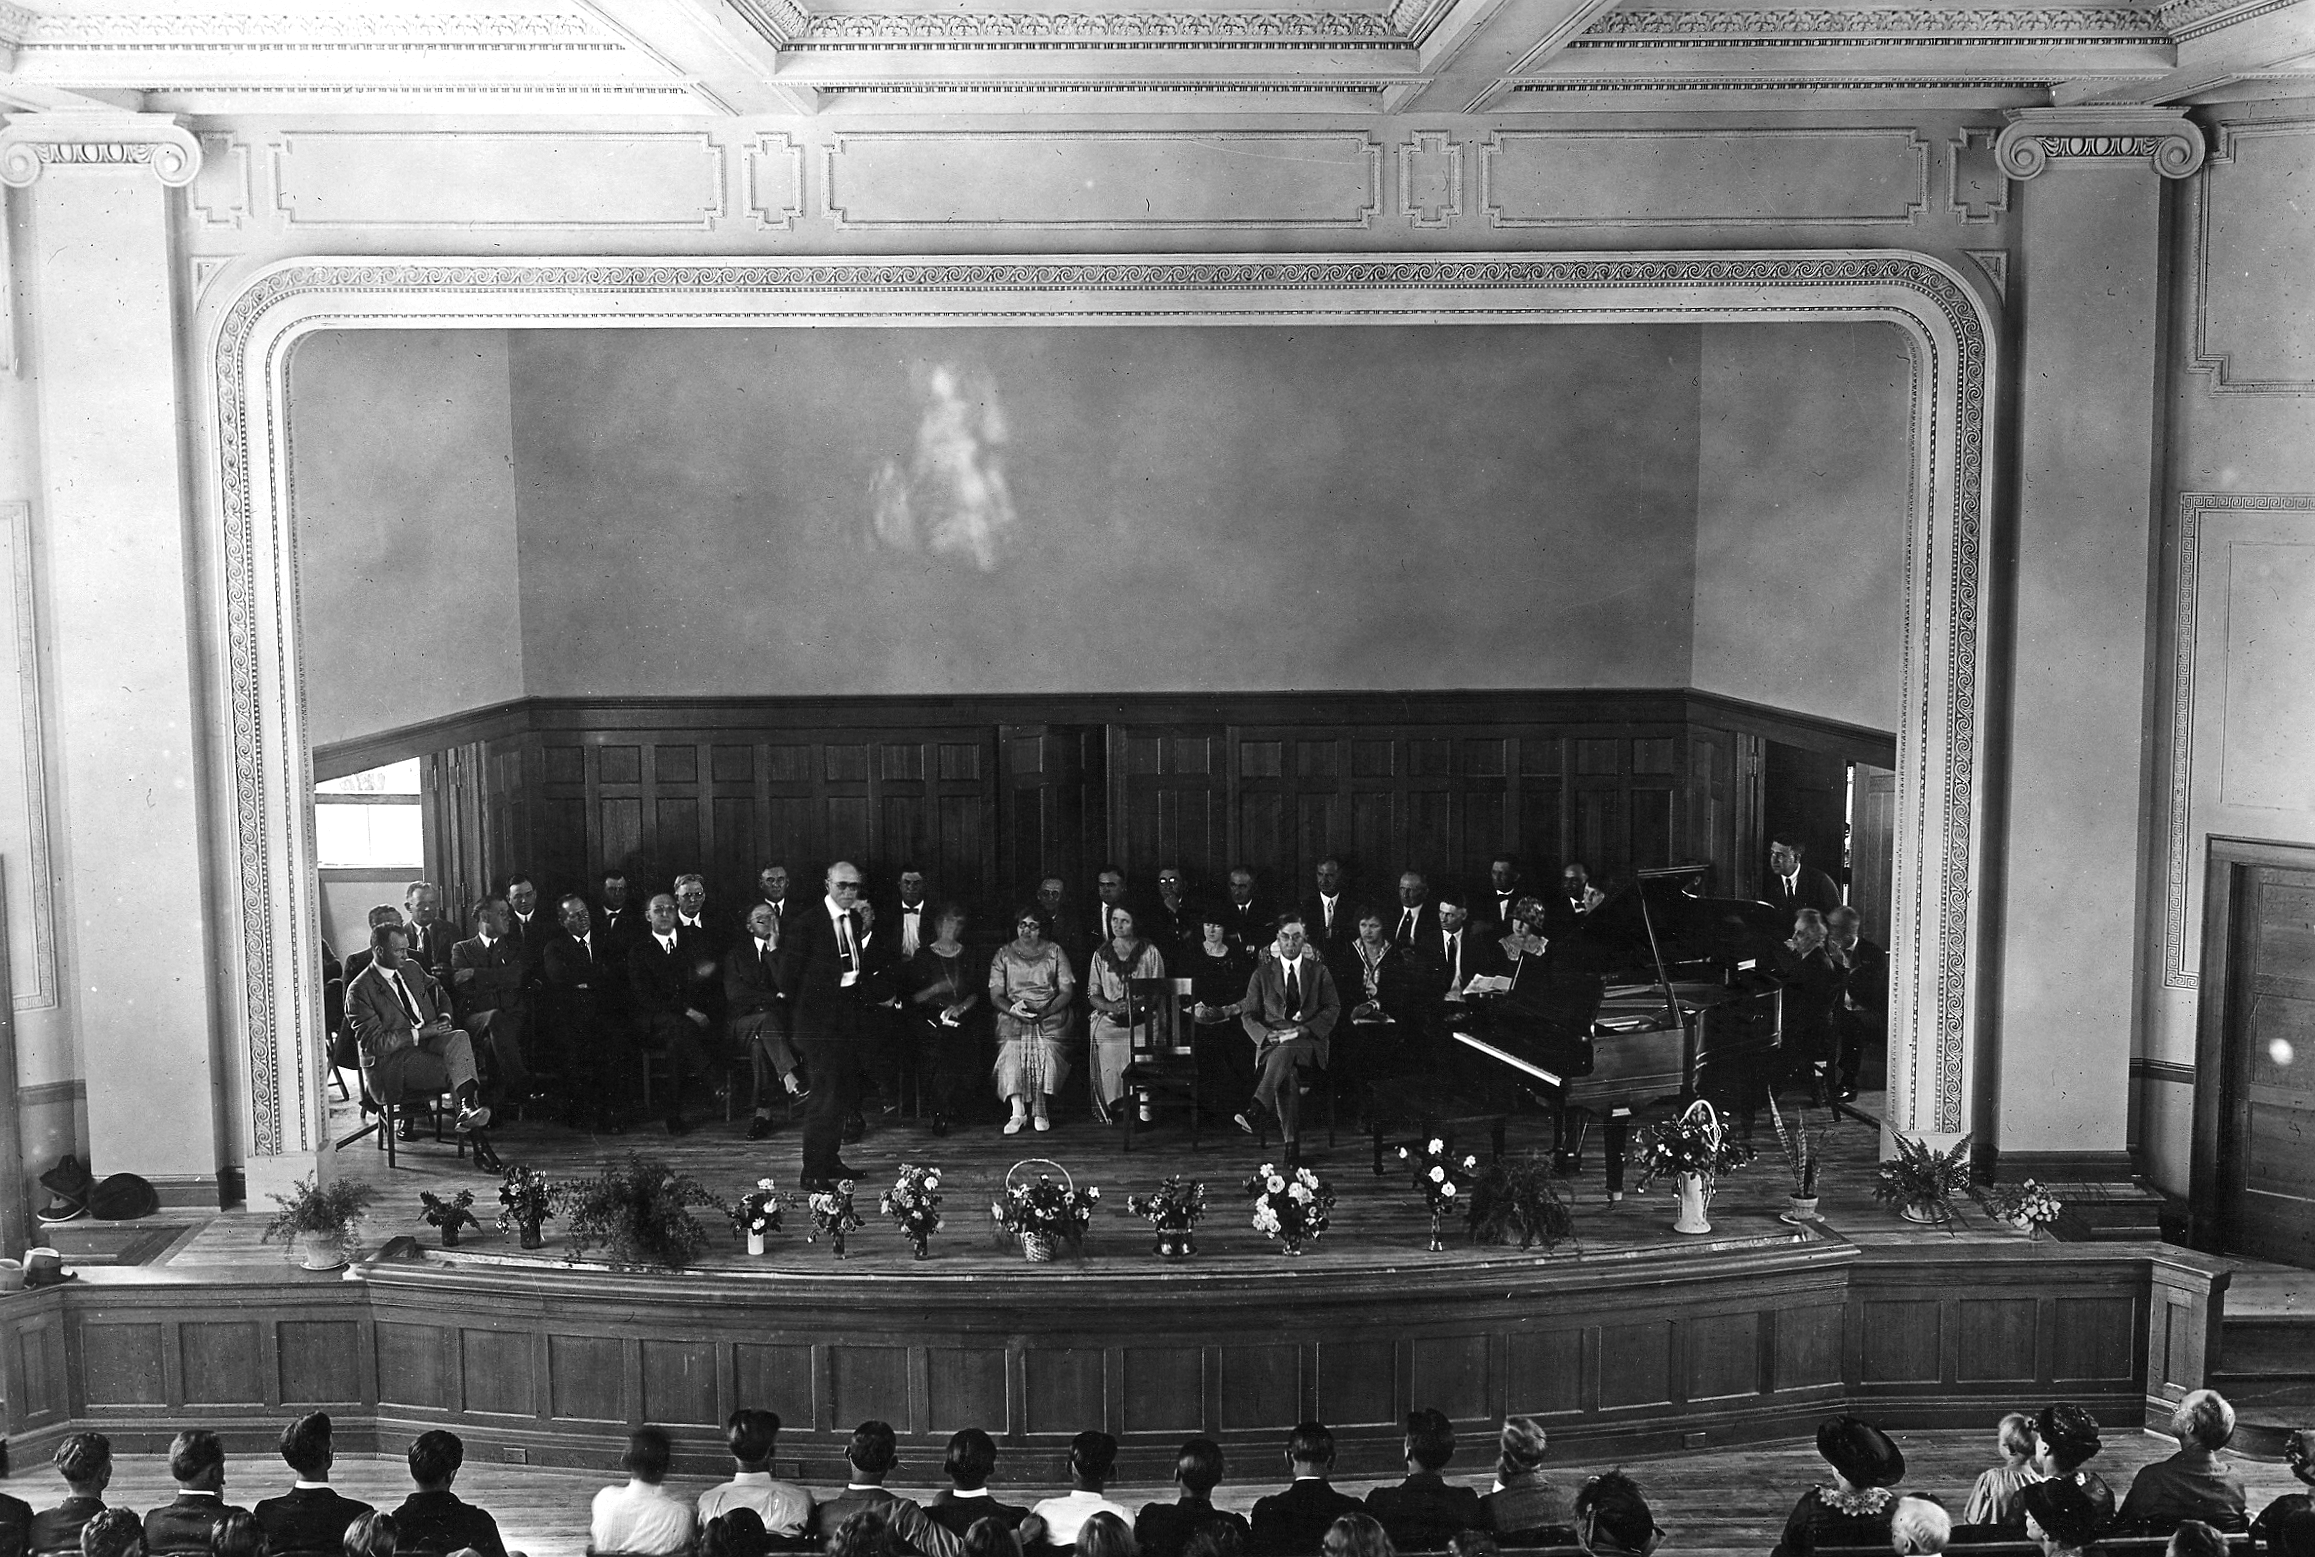 Opening Day 1923 address by Mayor Coombes